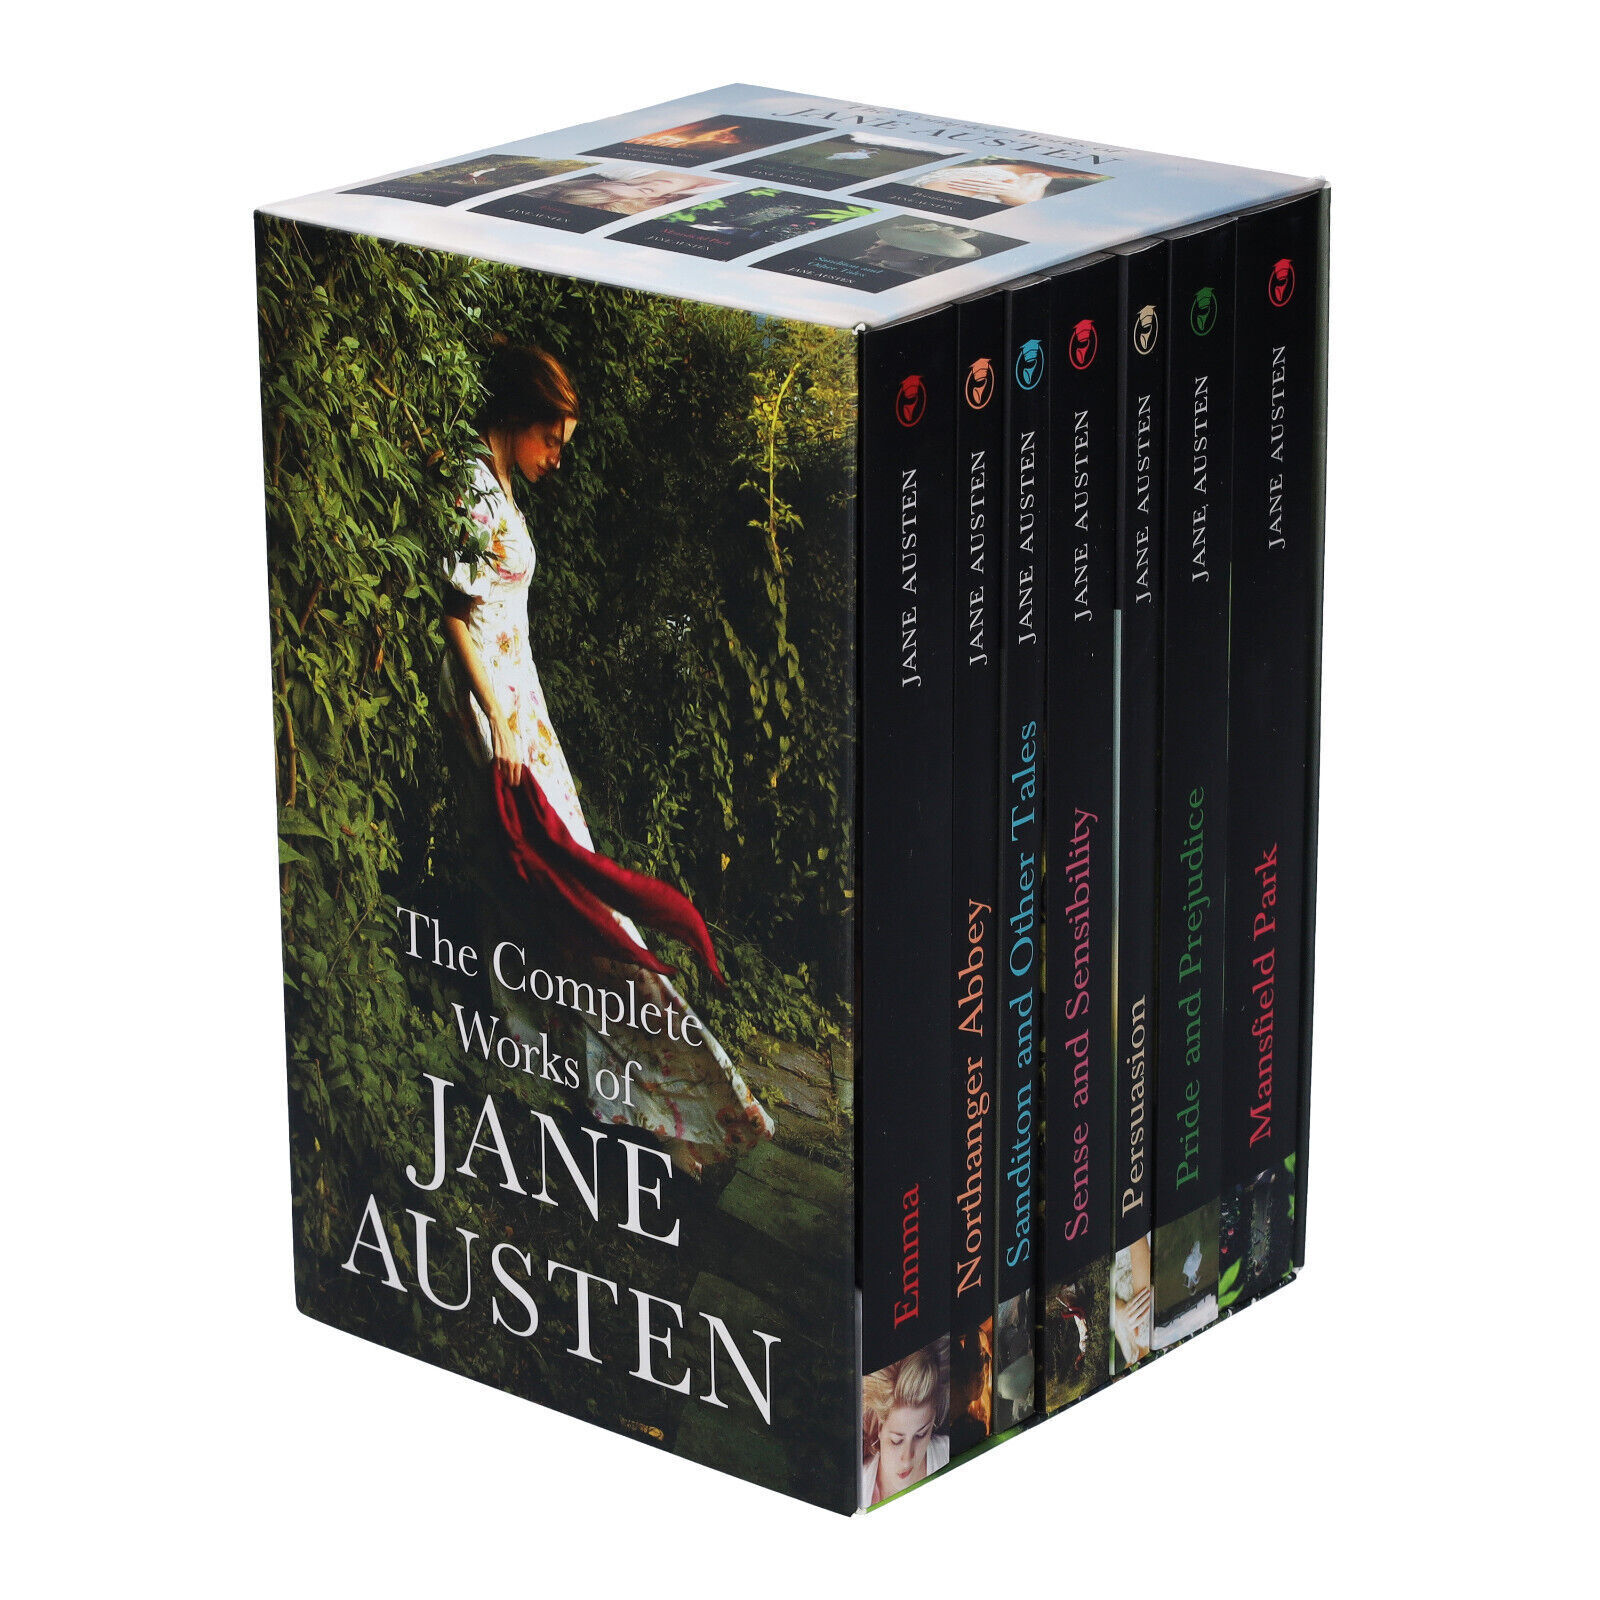 The Complete Works of Jane Austen 7 Books Collection Box Set -Fiction -Paperback